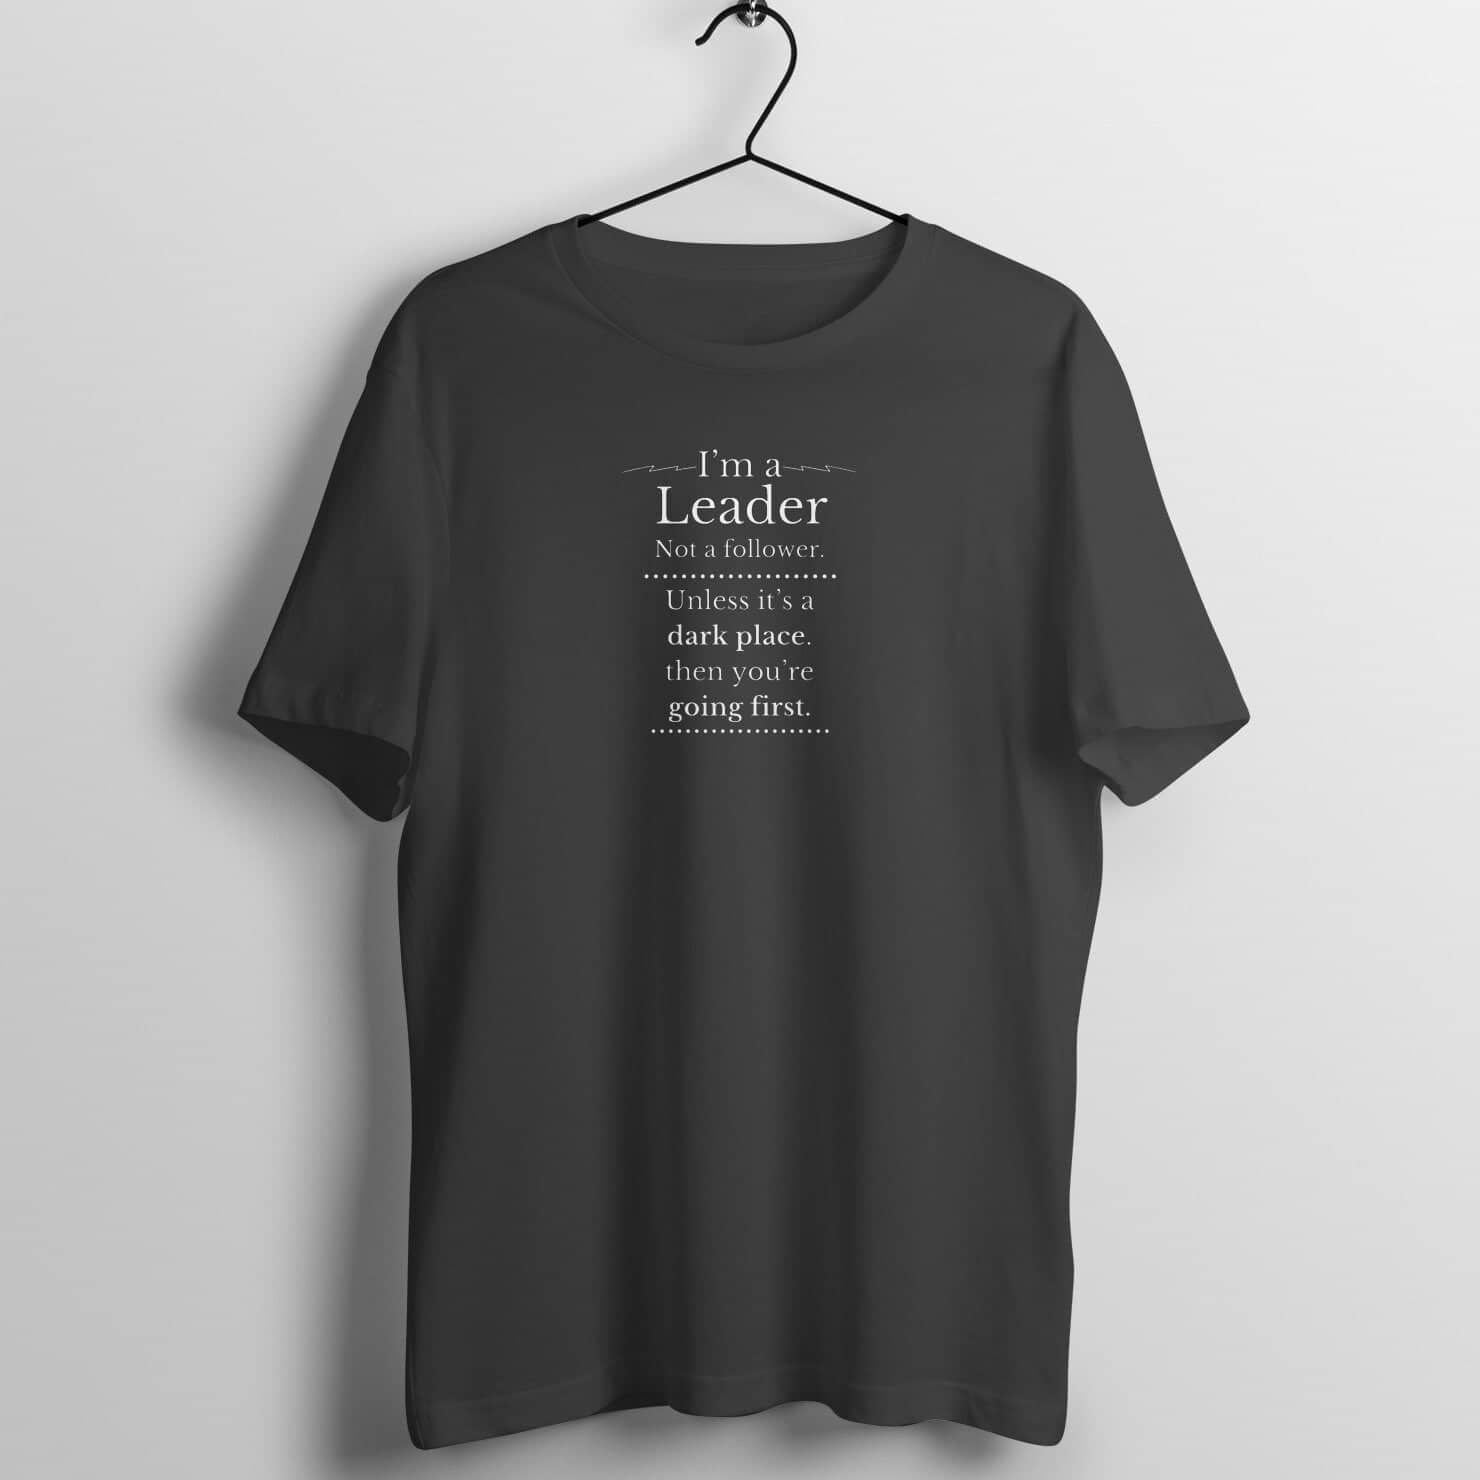 I'm a Leader Unless its Dark Funny Black T Shirt for Men and Women freeshipping - Catch My Drift India